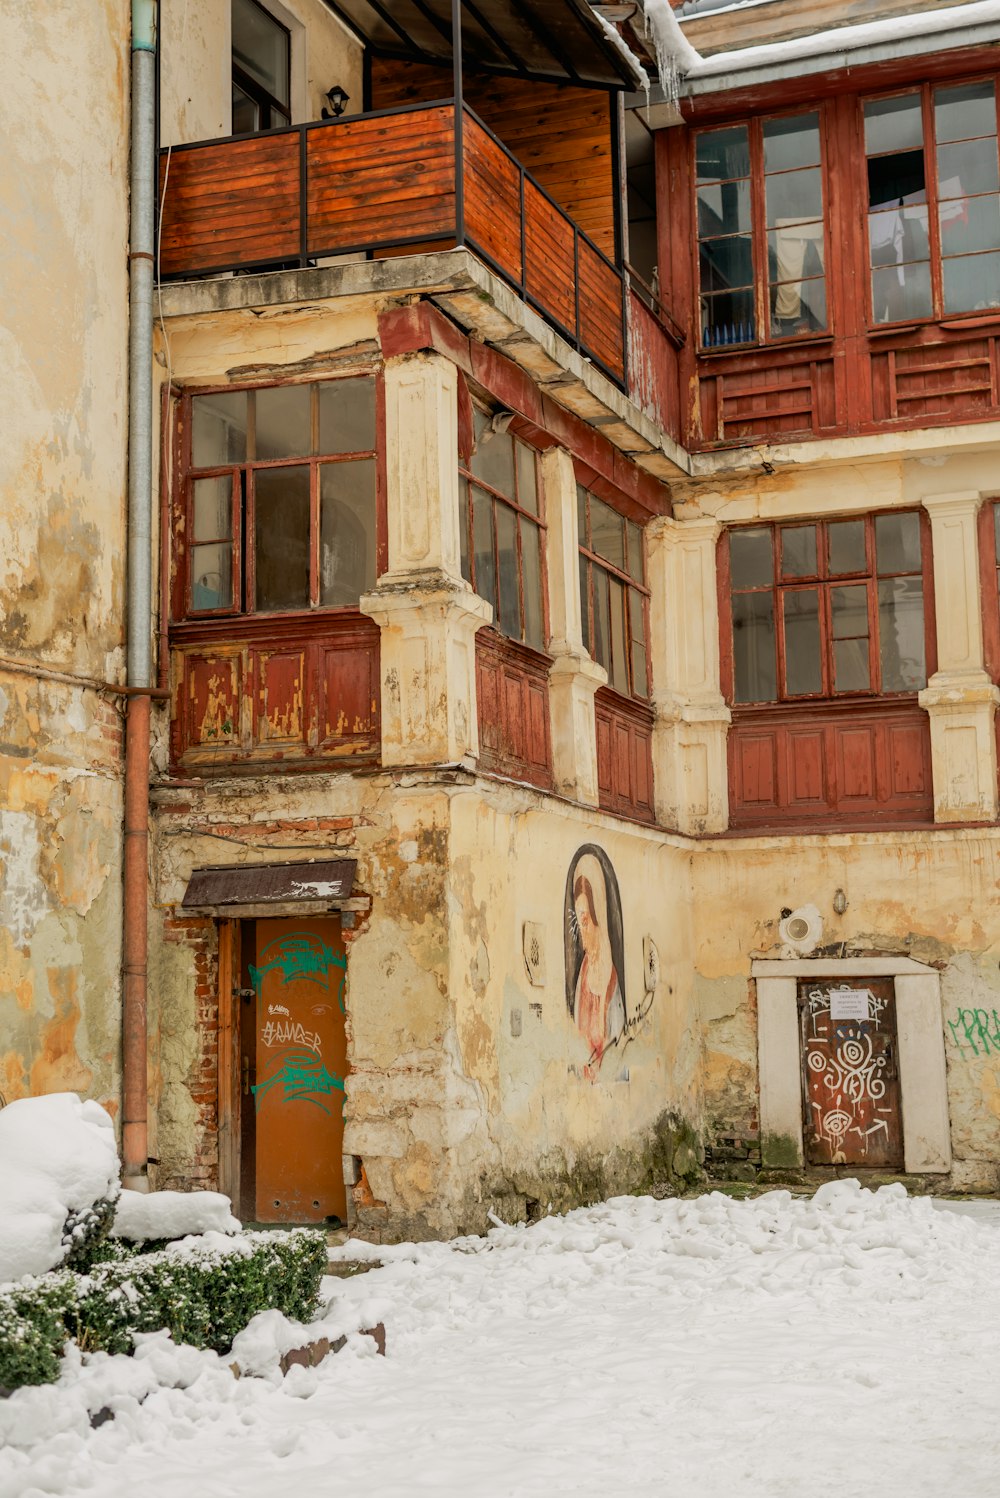 an old building with snow on the ground